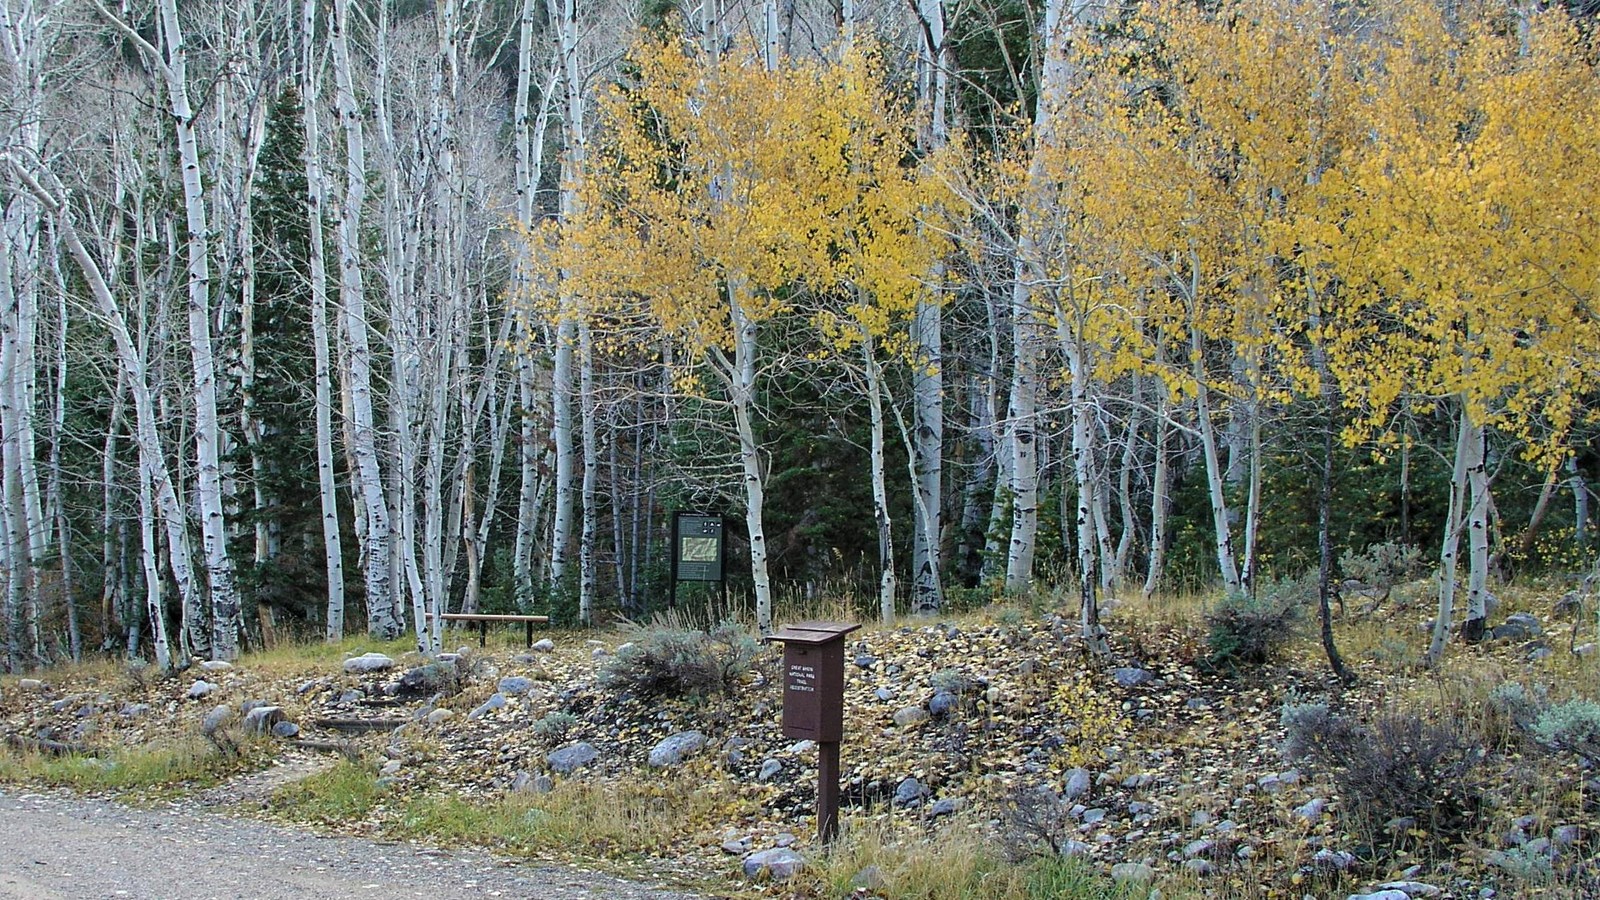 Gravel road with interpretive sign in the distance with aspens trees changing colors